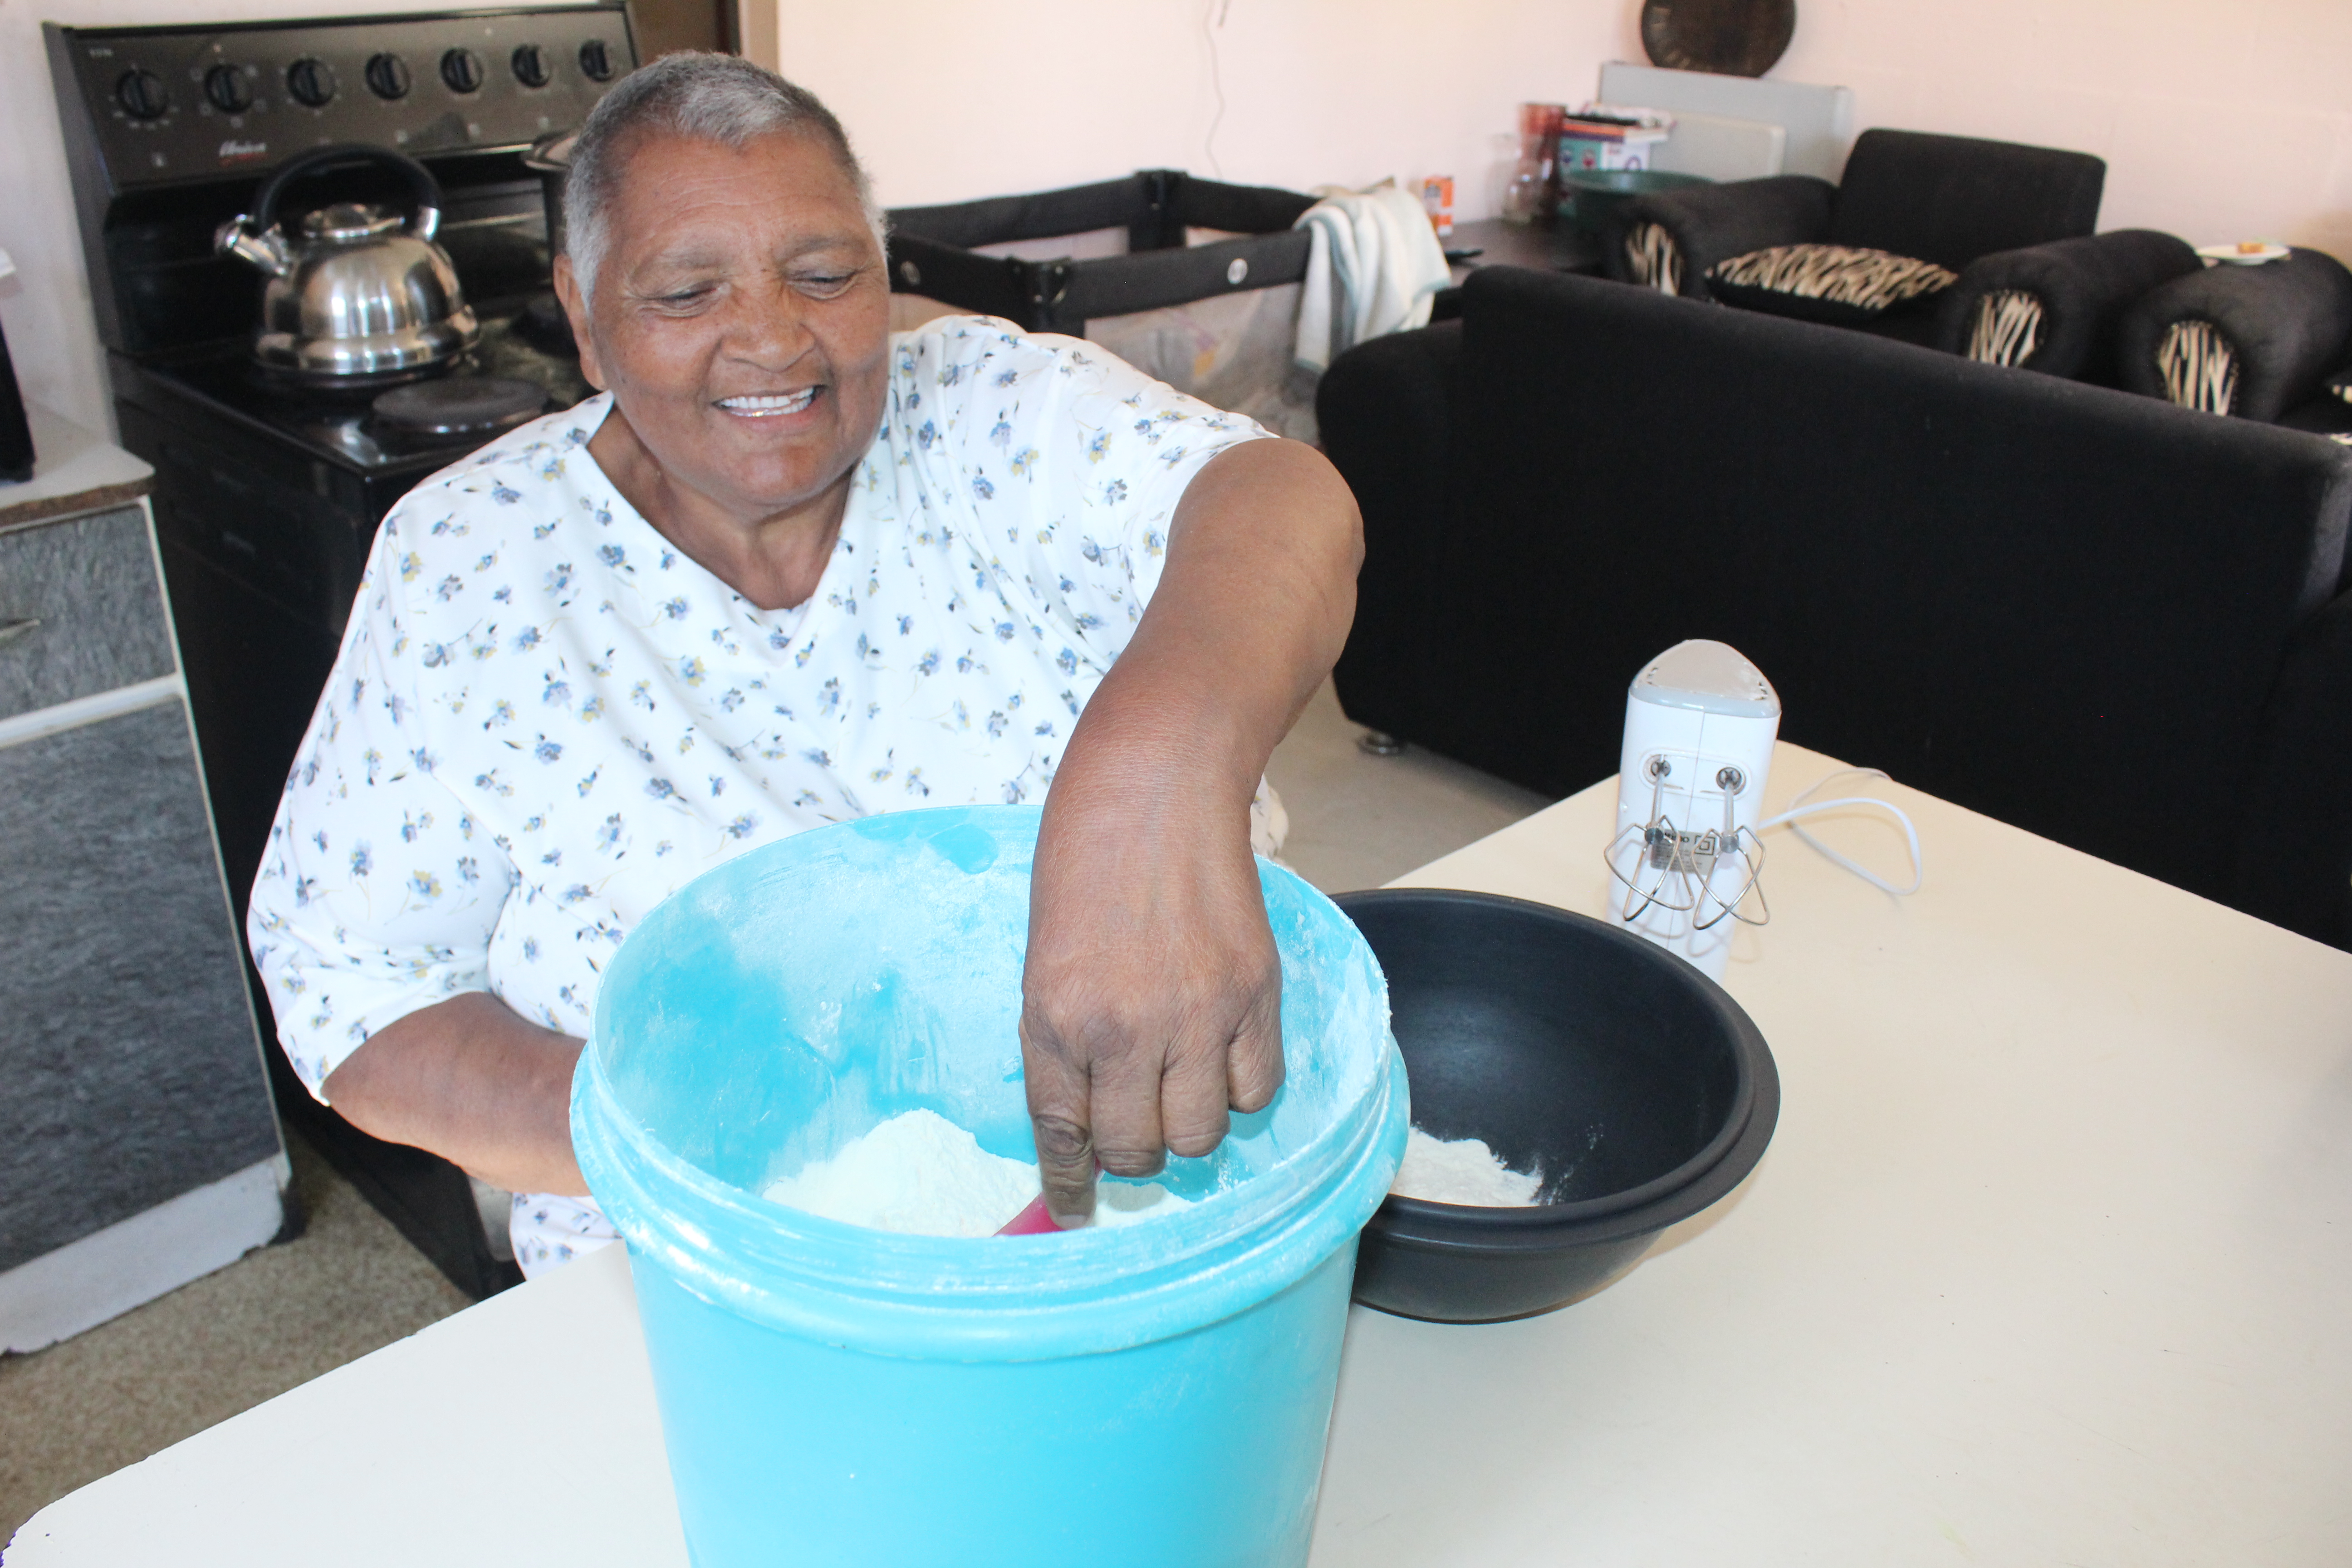 Mildred Swanepoel in her happy place, baking again for her community after suffering a stroke a year ago.